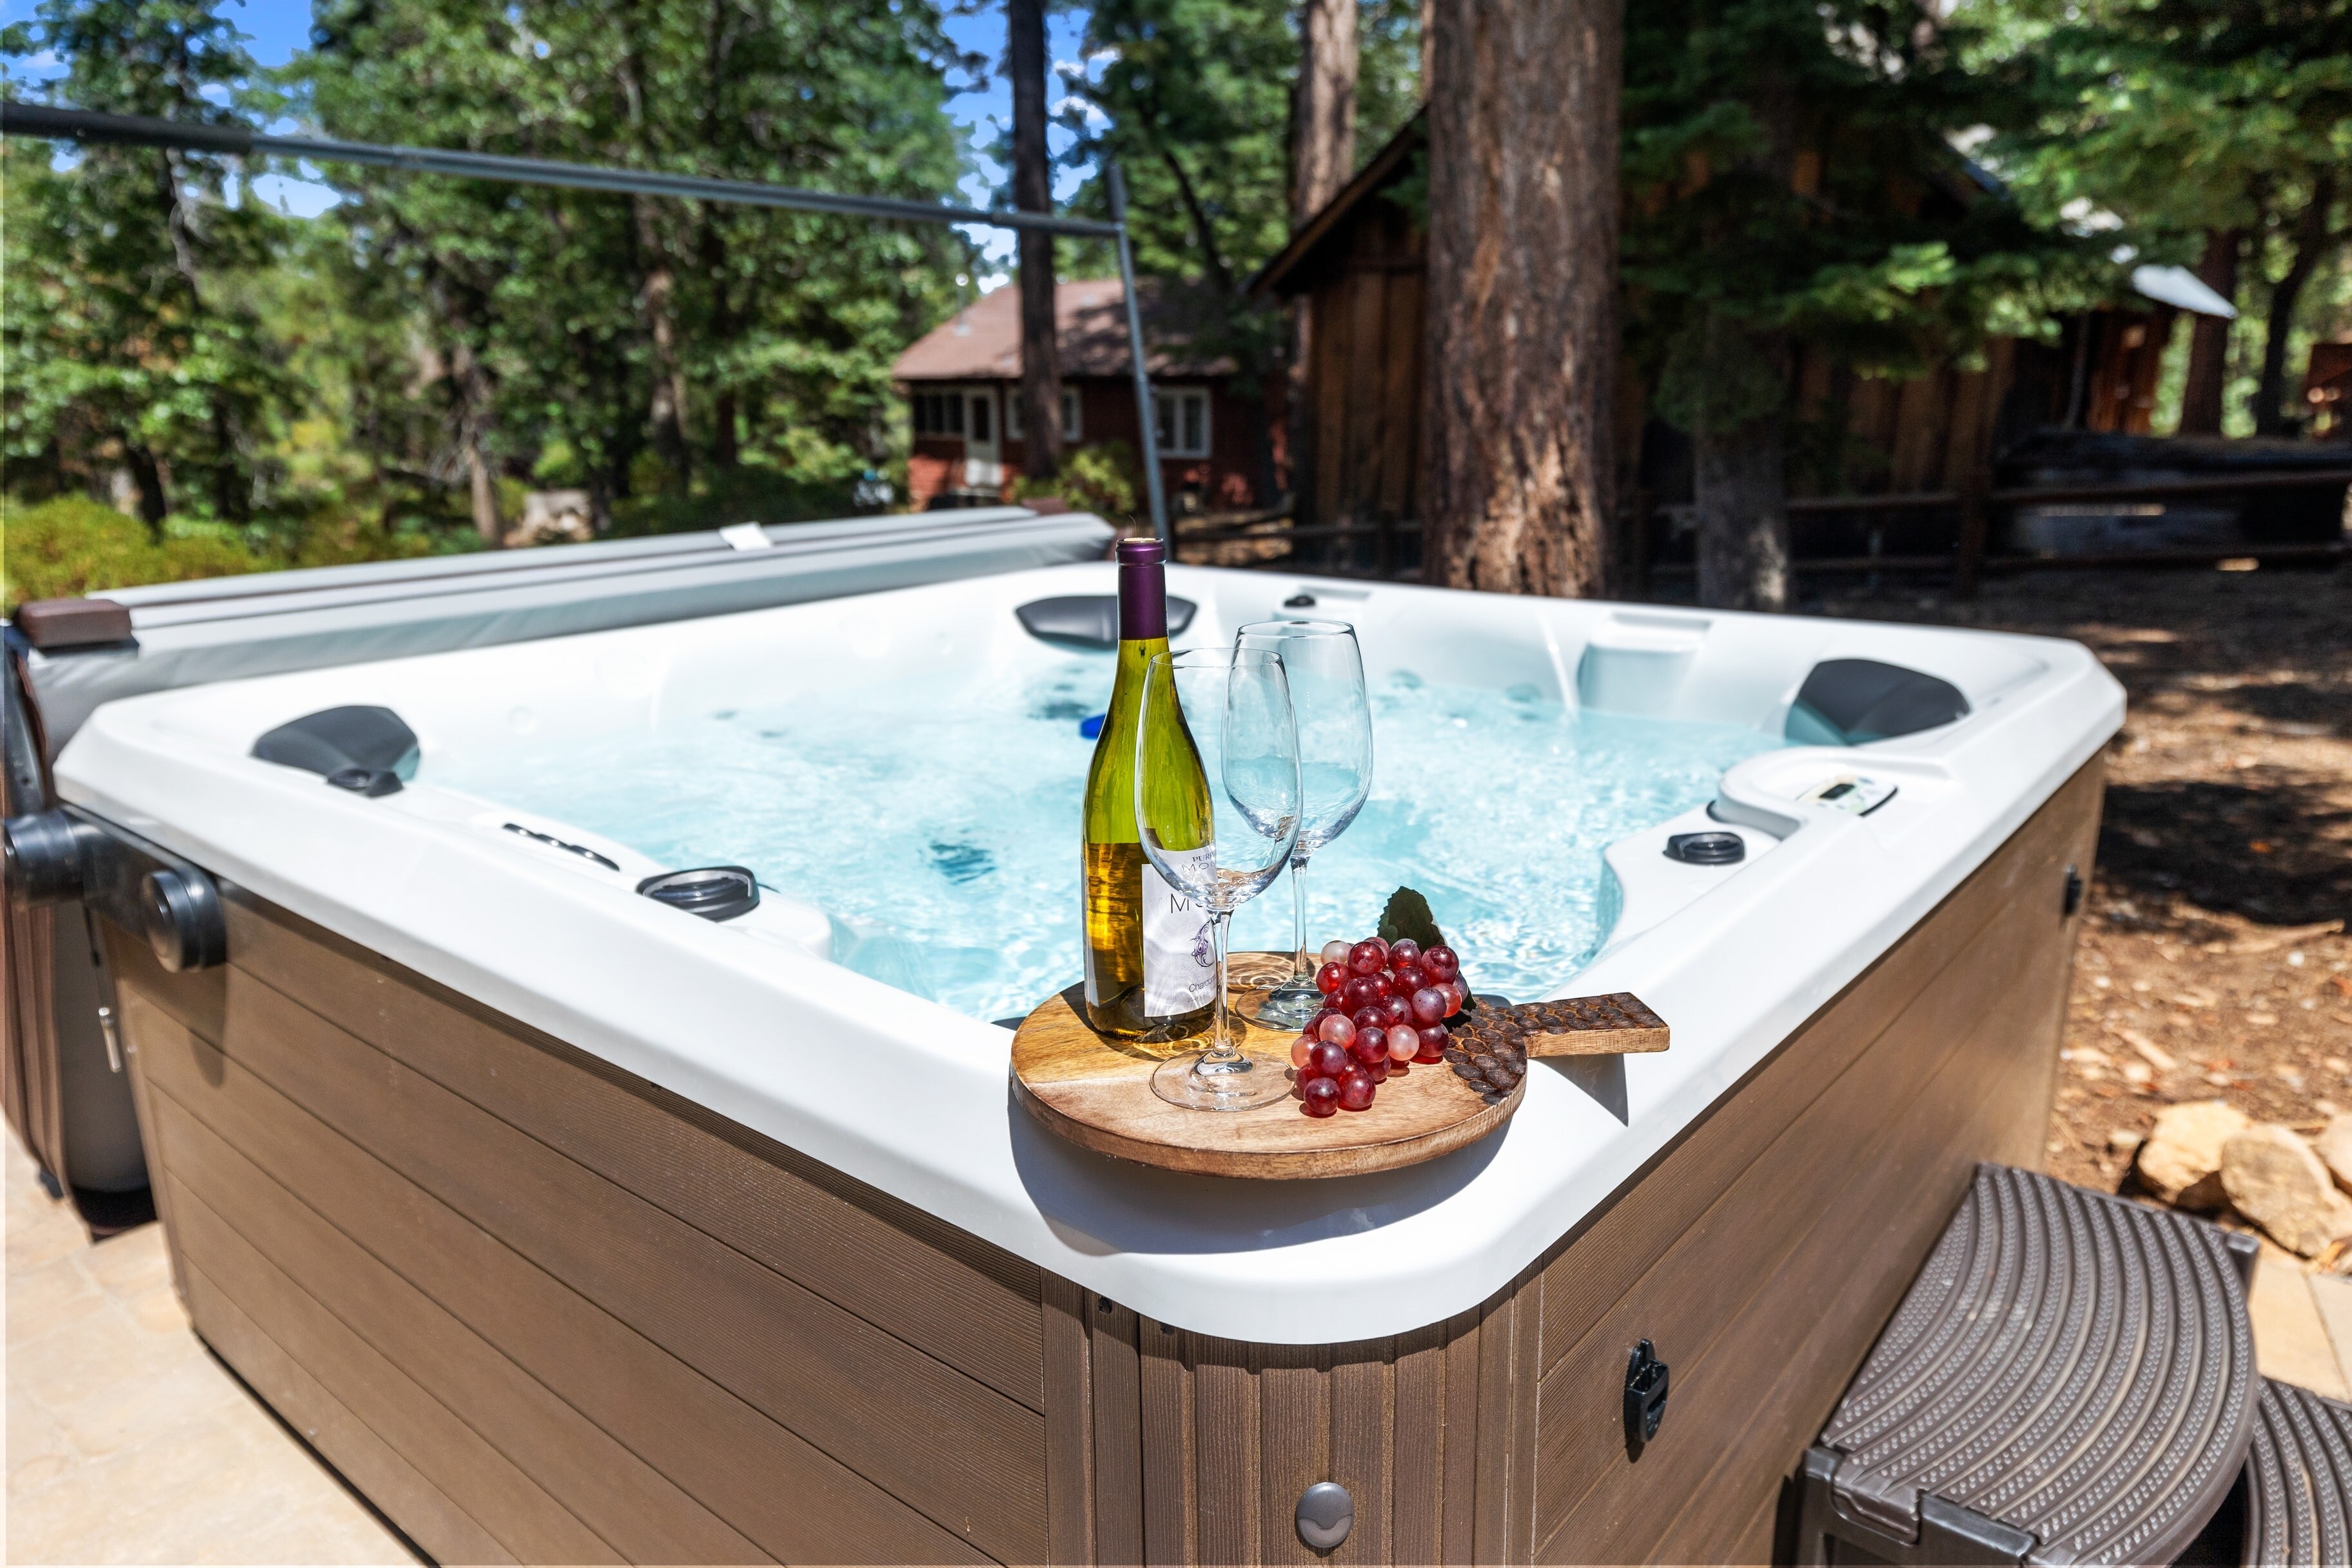 Luxurious hot tub in the backyard is perfect for a soak after a day of exploring.